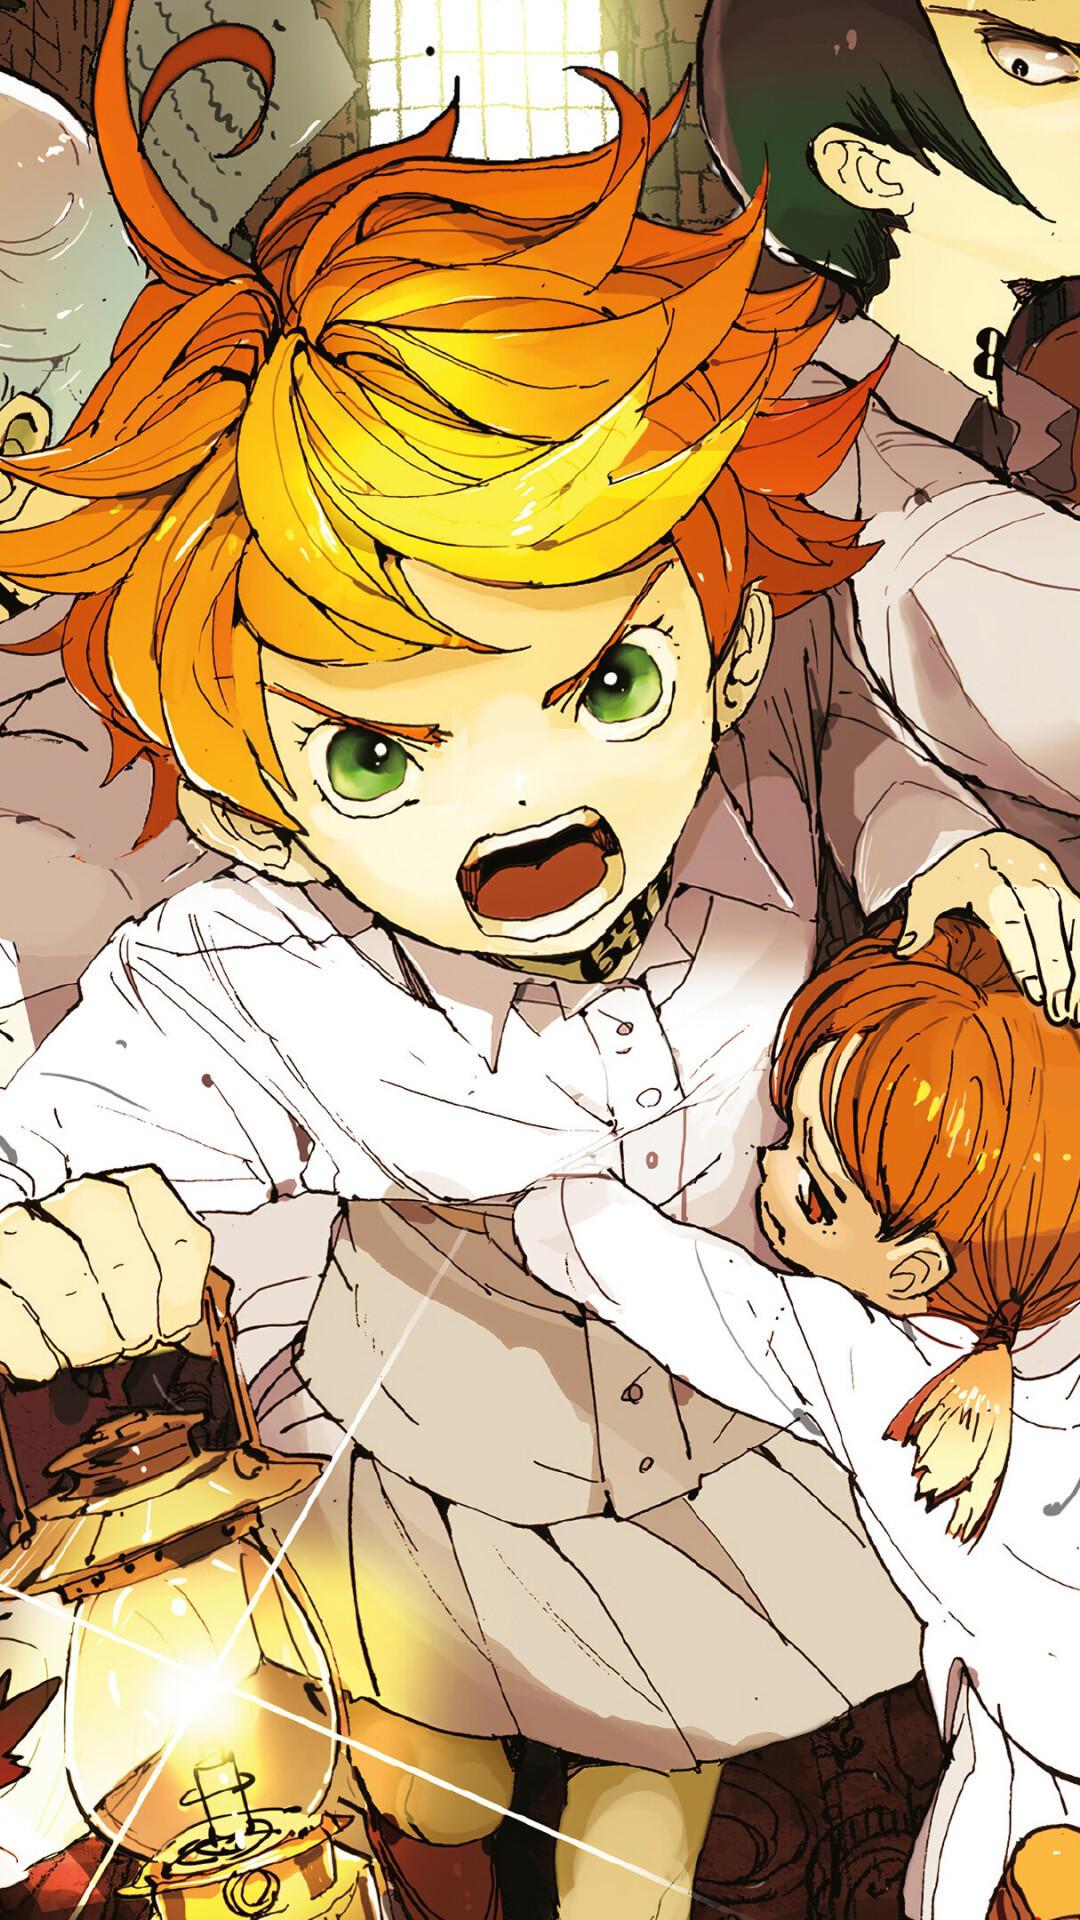 The Promised Neverland: The anime series was awarded "Best Fantasy" at 2020 Crunchyroll Anime Awards. 1080x1920 Full HD Background.